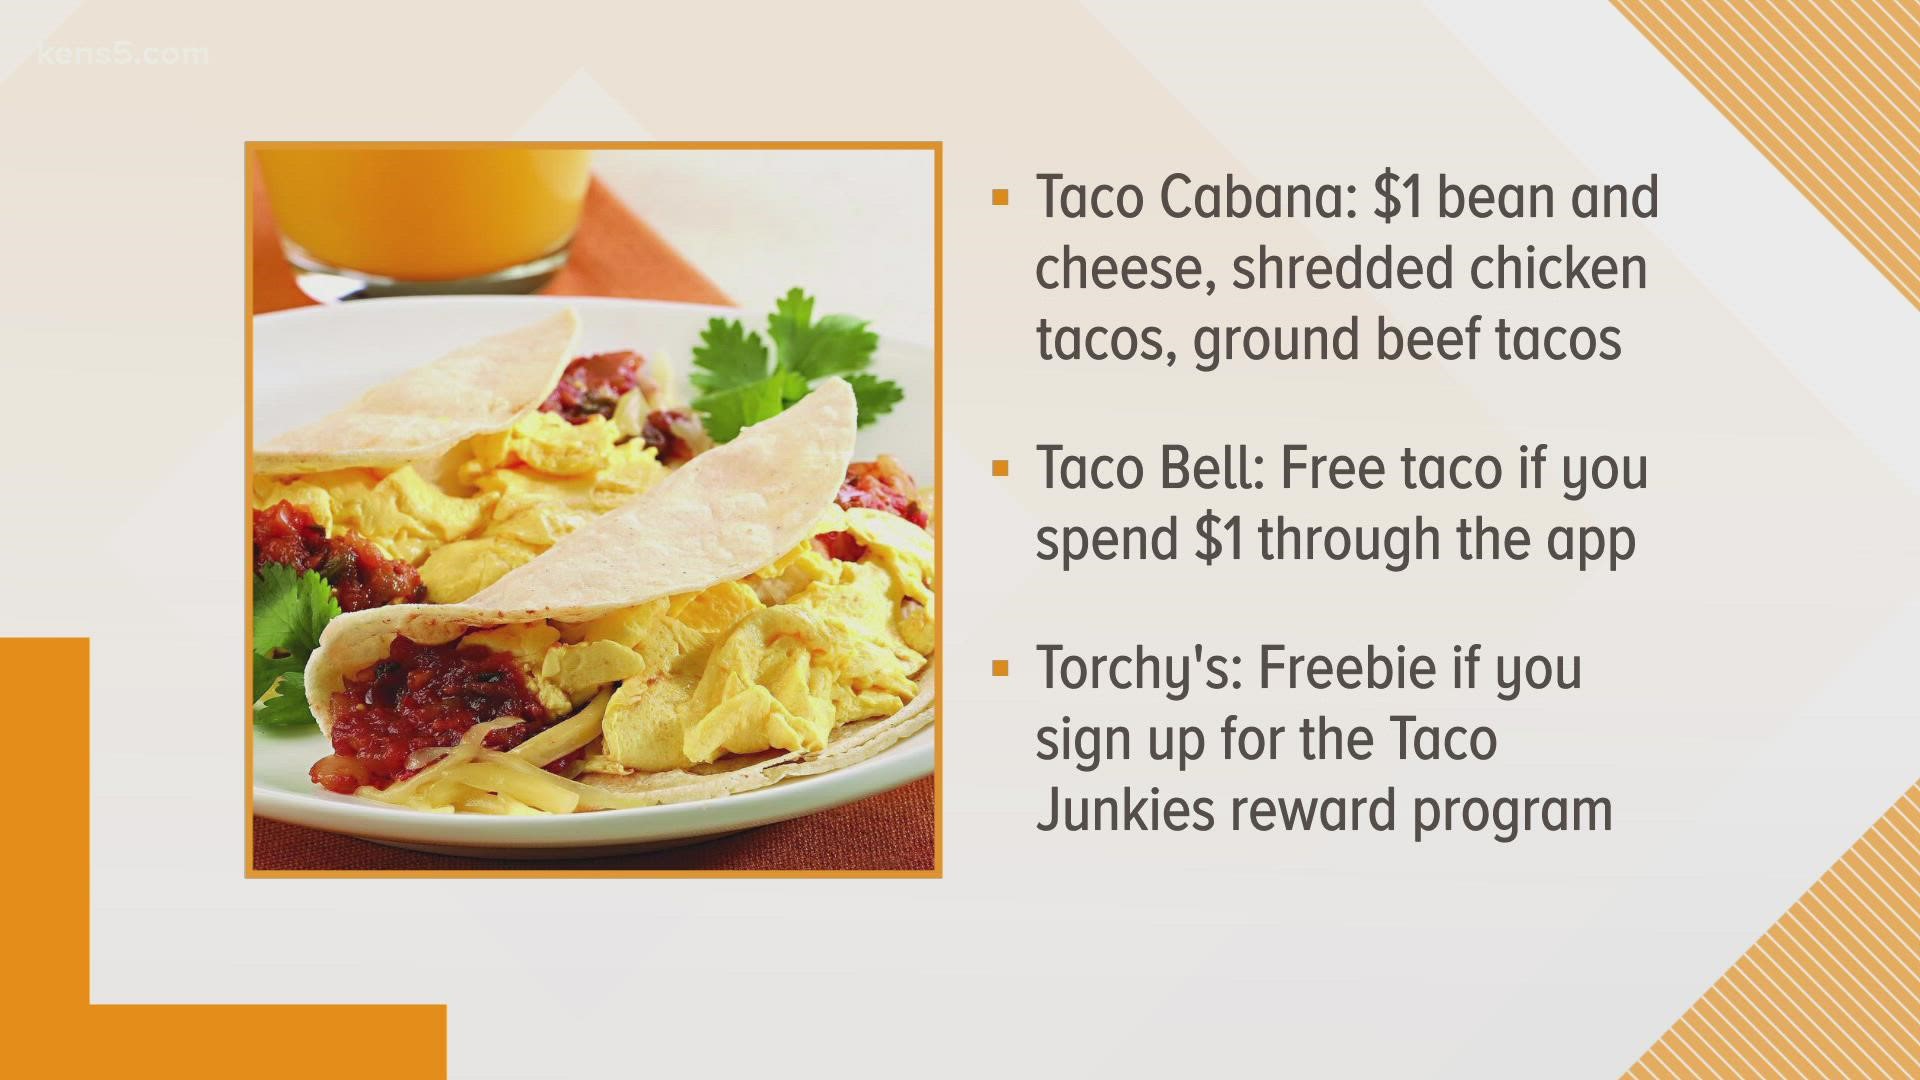 Well, well, well! Looks like it's time to celebrate TACOS! Here are some deals.